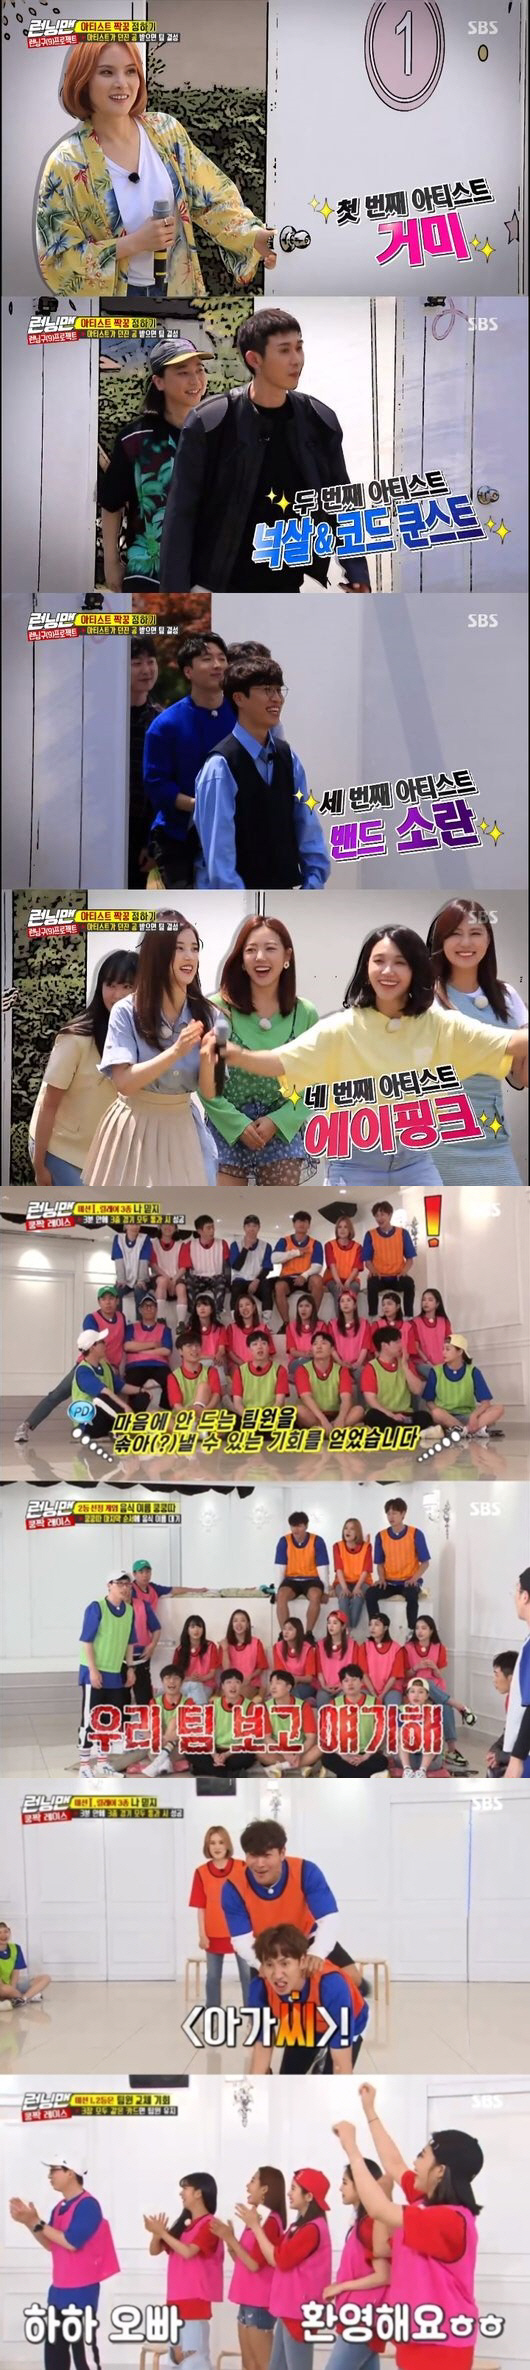 SBS Running Man released the collaboration The Artists to hold a domestic fan meeting for the 9th anniversary, and kept the top spot in the same time zone of 2049 Target ratings.The broadcast was made up of the Running Zone Project, and the top four artists who will hold a 9th anniversary Korean fan meeting with the members were unveiled.The Artist 1 team and two members had to be paired, and the OST Queen spider first appeared, paired with Kim Jong-kook and Lee Kwang-soo.Nunsal & Cod Kunst was in close contact with Song Ji-hyo X Haha, and the band disturbance was paired with Yoo Jae-Suk X Jeon So-min and girl group Apink with Ji Suk-jin X Yang Se-chan.In particular, Nucksal and Song Ji-hyo made a bigger smile as they became a hot topic with resemblance.With the first pair set, it was decorated with a kung-kak race that takes place in a total of three rounds.The final team was able to stand on stage as a collaboration team, and all teams played a confrontation without concessions.In the first showdown, the spider X Kim Jong-kook X Lee Kwang-soo team took first place and did not change the team member, but the second-ranked Apink X Ji Suk-jin X Yang Se-chan team did not agree.Eventually, Yoo Jae-Suk X Haha was paired with Apink, and the scene was the best one minute with a highest audience rating of 8.7%.Next weeks broadcast will reveal the final results of the Colabo Race.